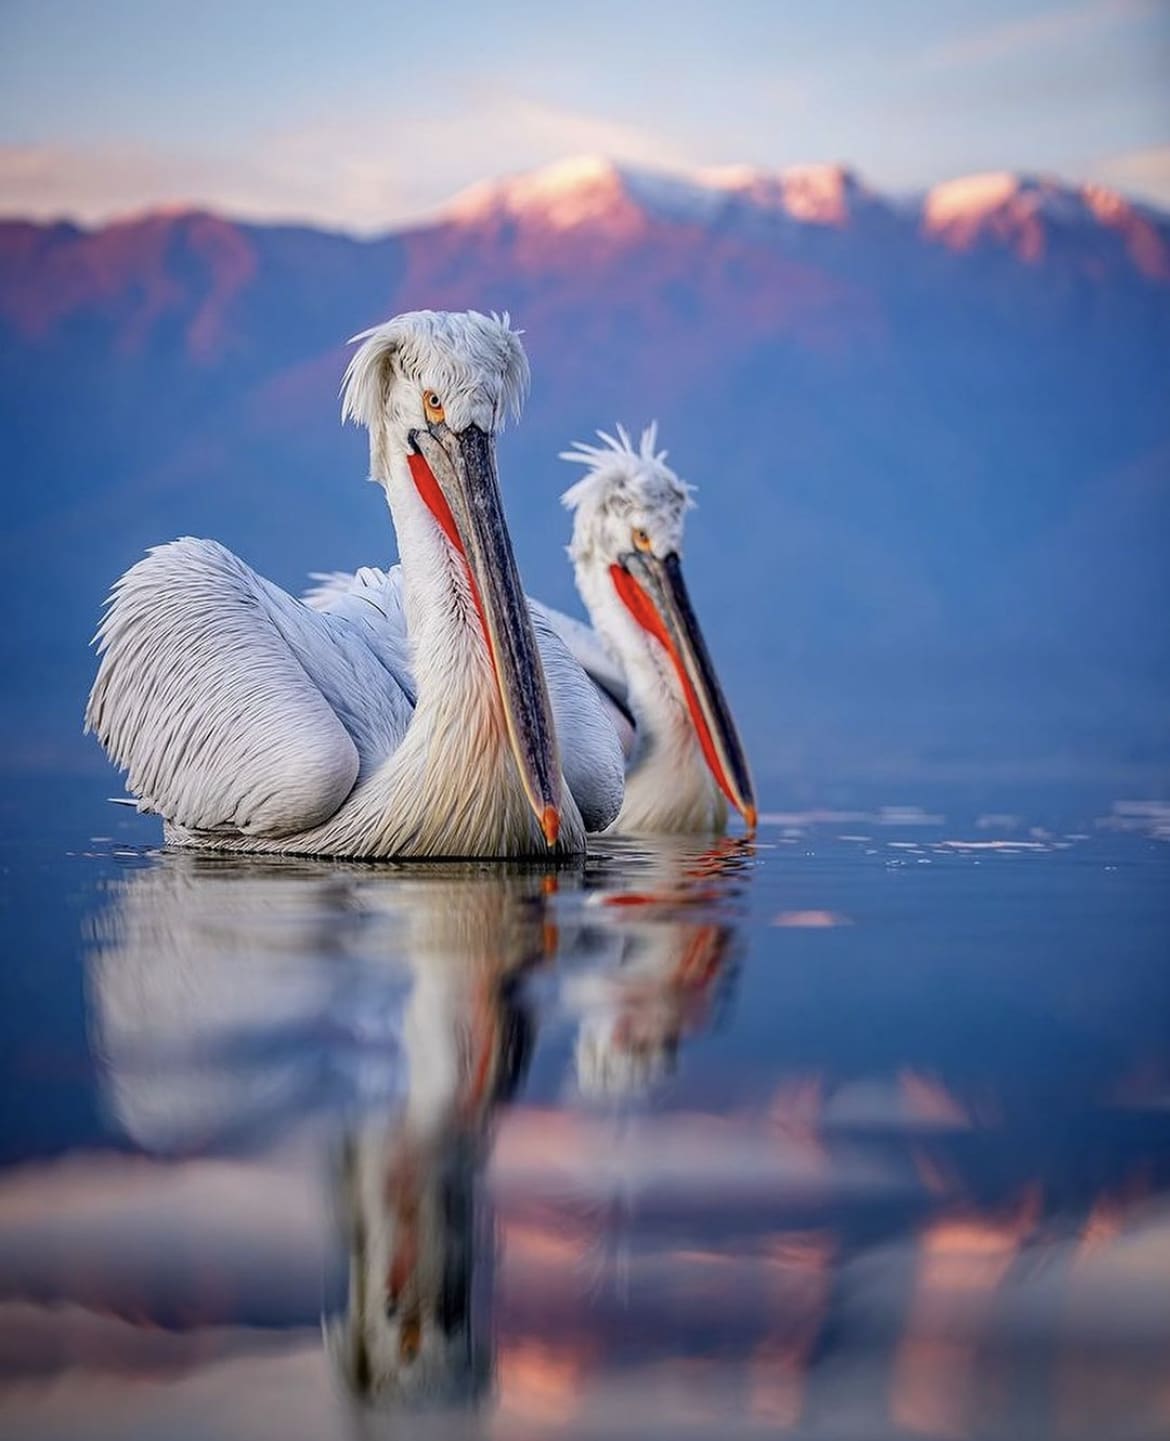 Dalmation Pelican - The World's 10 Largest Birds